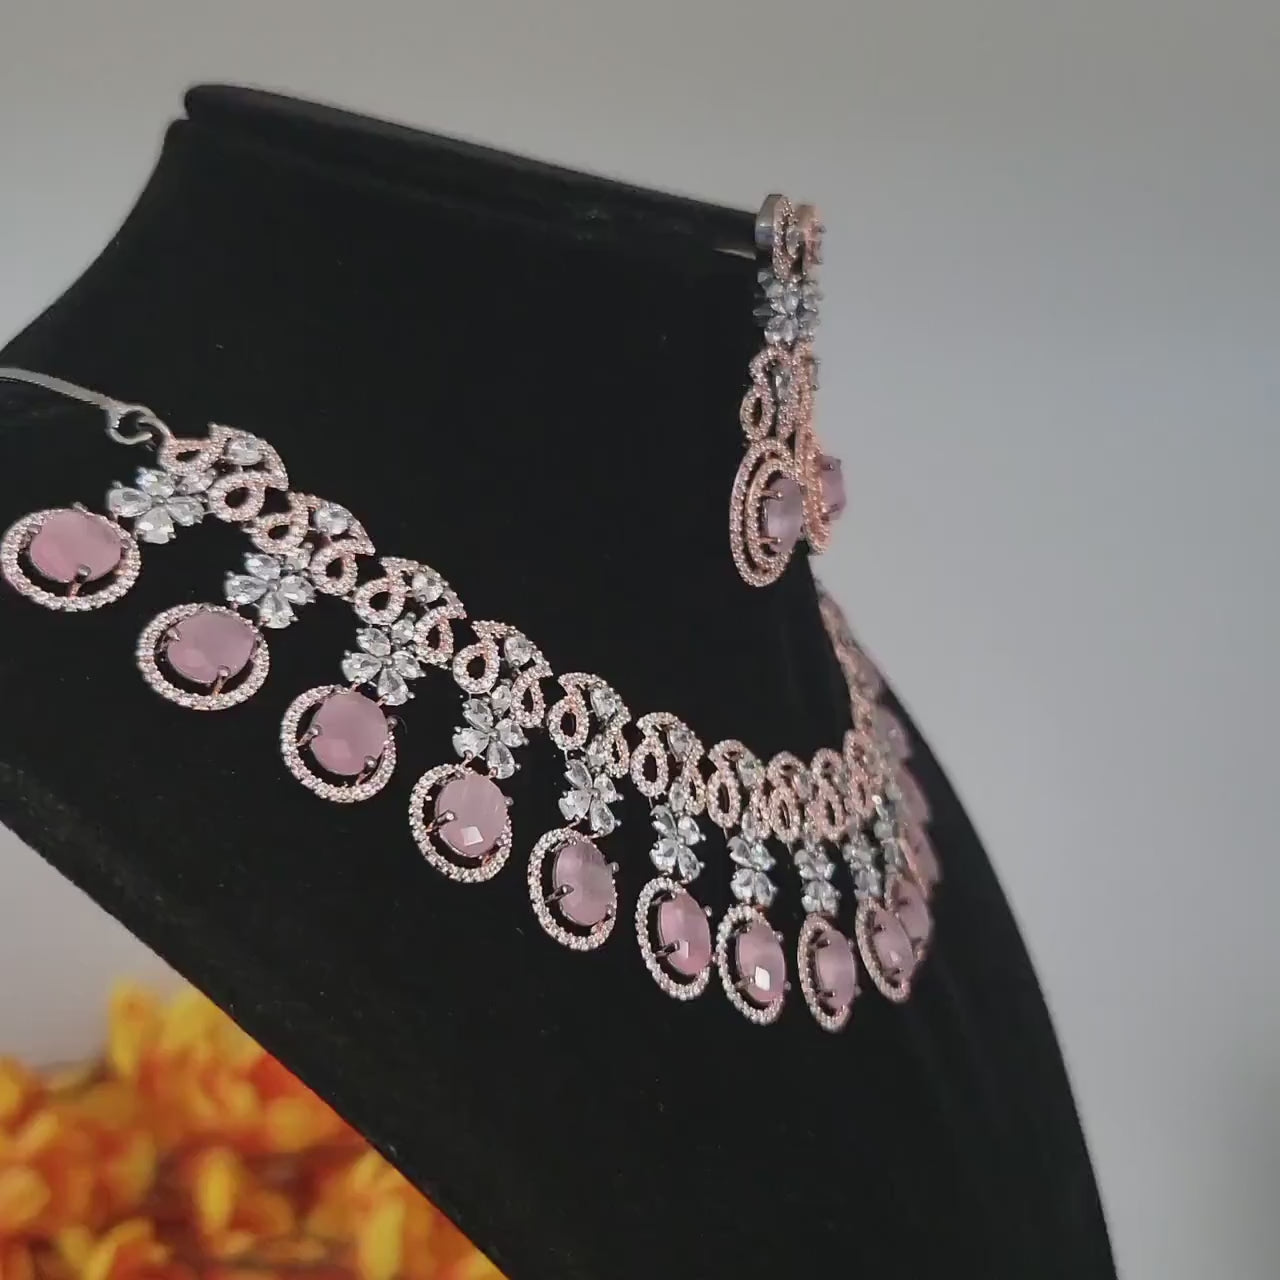 Pink Wedding necklace with American Diamond Cz stones| Statement jewelry| Rose gold and Oxidized Black Polish Choker jewelry| Gift for Her